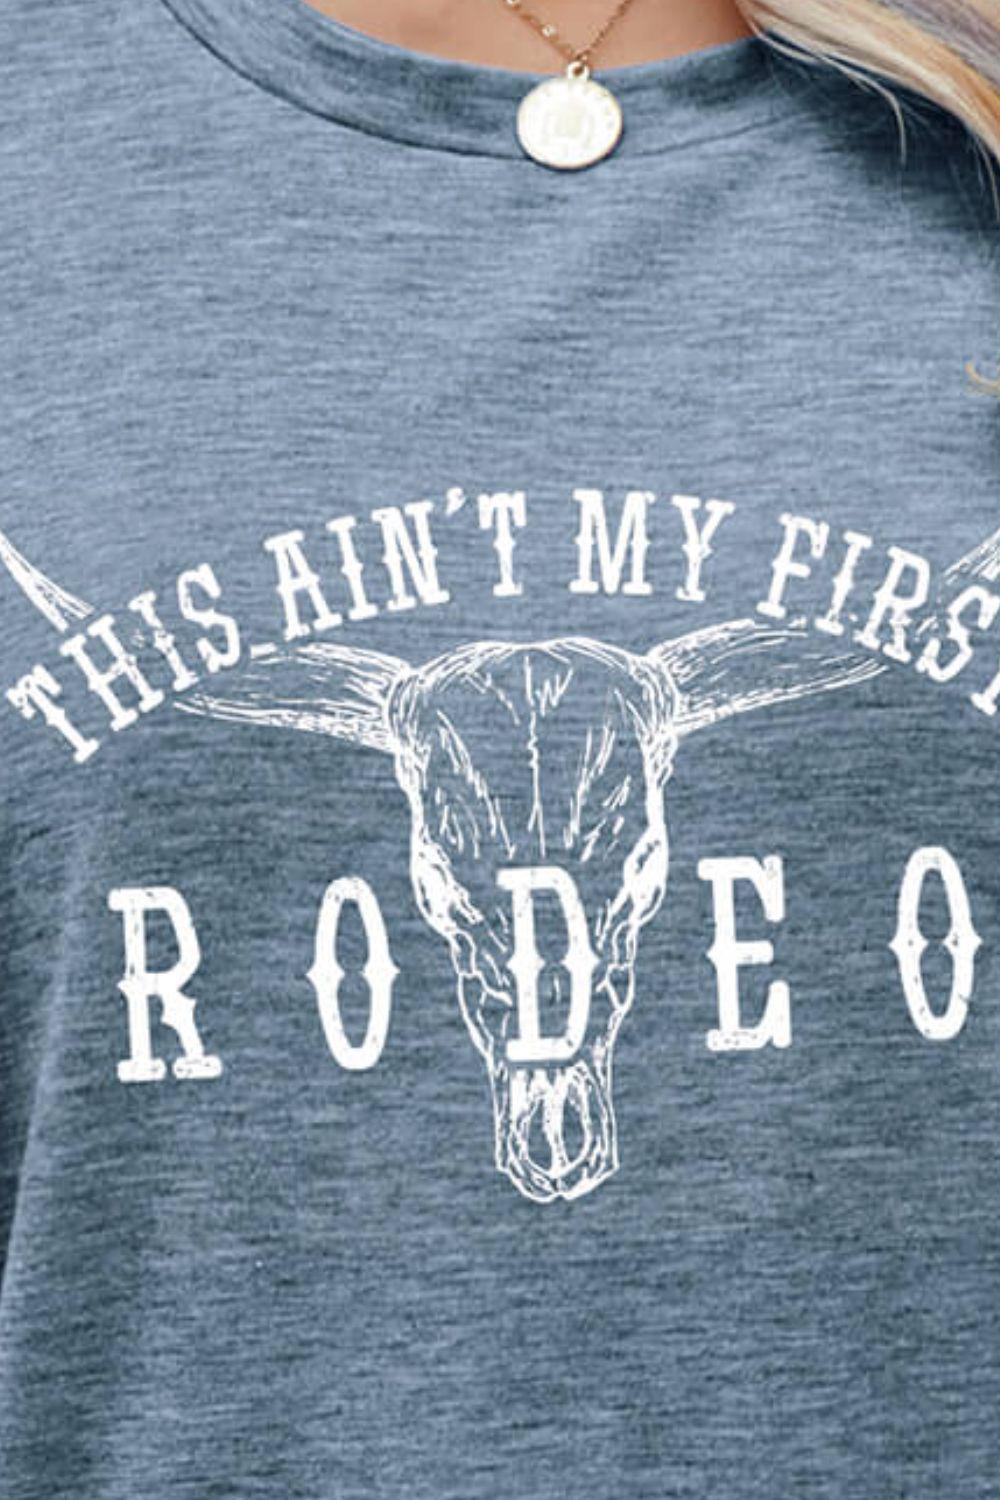 THIS AIN'T MY FIRST RODEO Tee Shirt BLUE ZONE PLANET